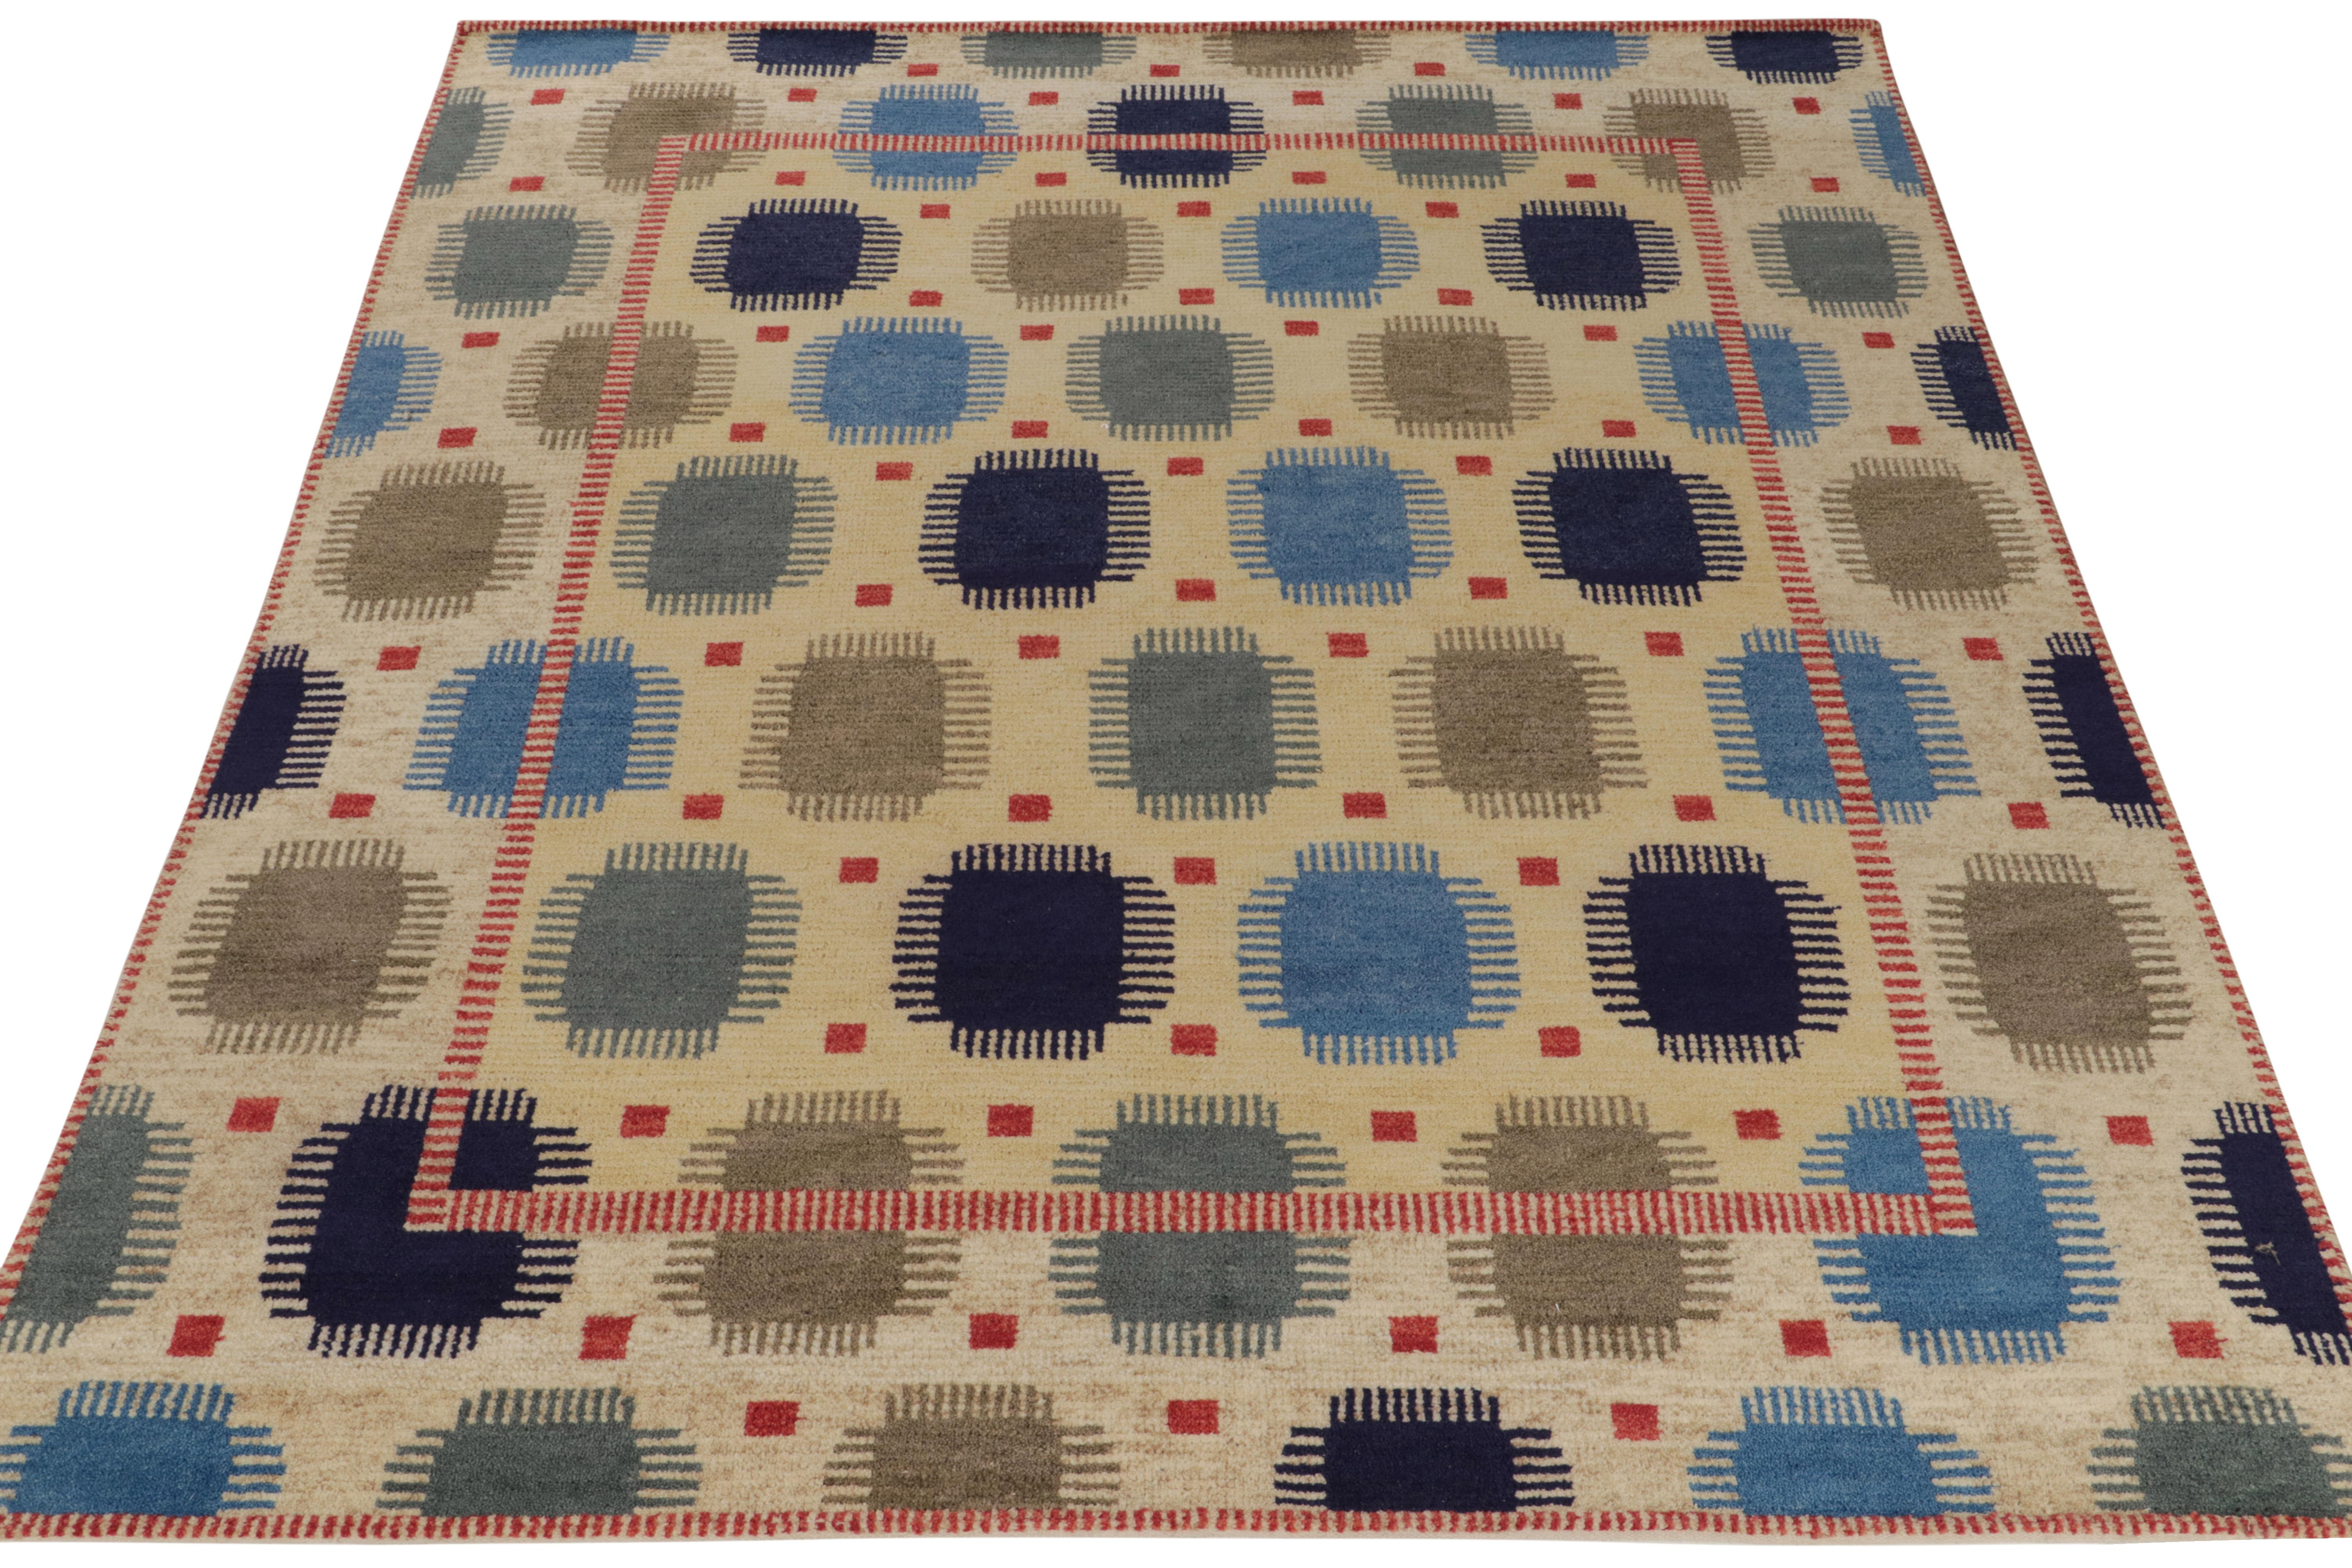 An 8x9 handwoven imagination from Rug & Kilim’s award winning Scandinavian selections exemplifying mid century aesthetics. The Swedish style rug flourishes in a repetitive geometric pattern relishing earthy tones of beige, brown & blue deliciously